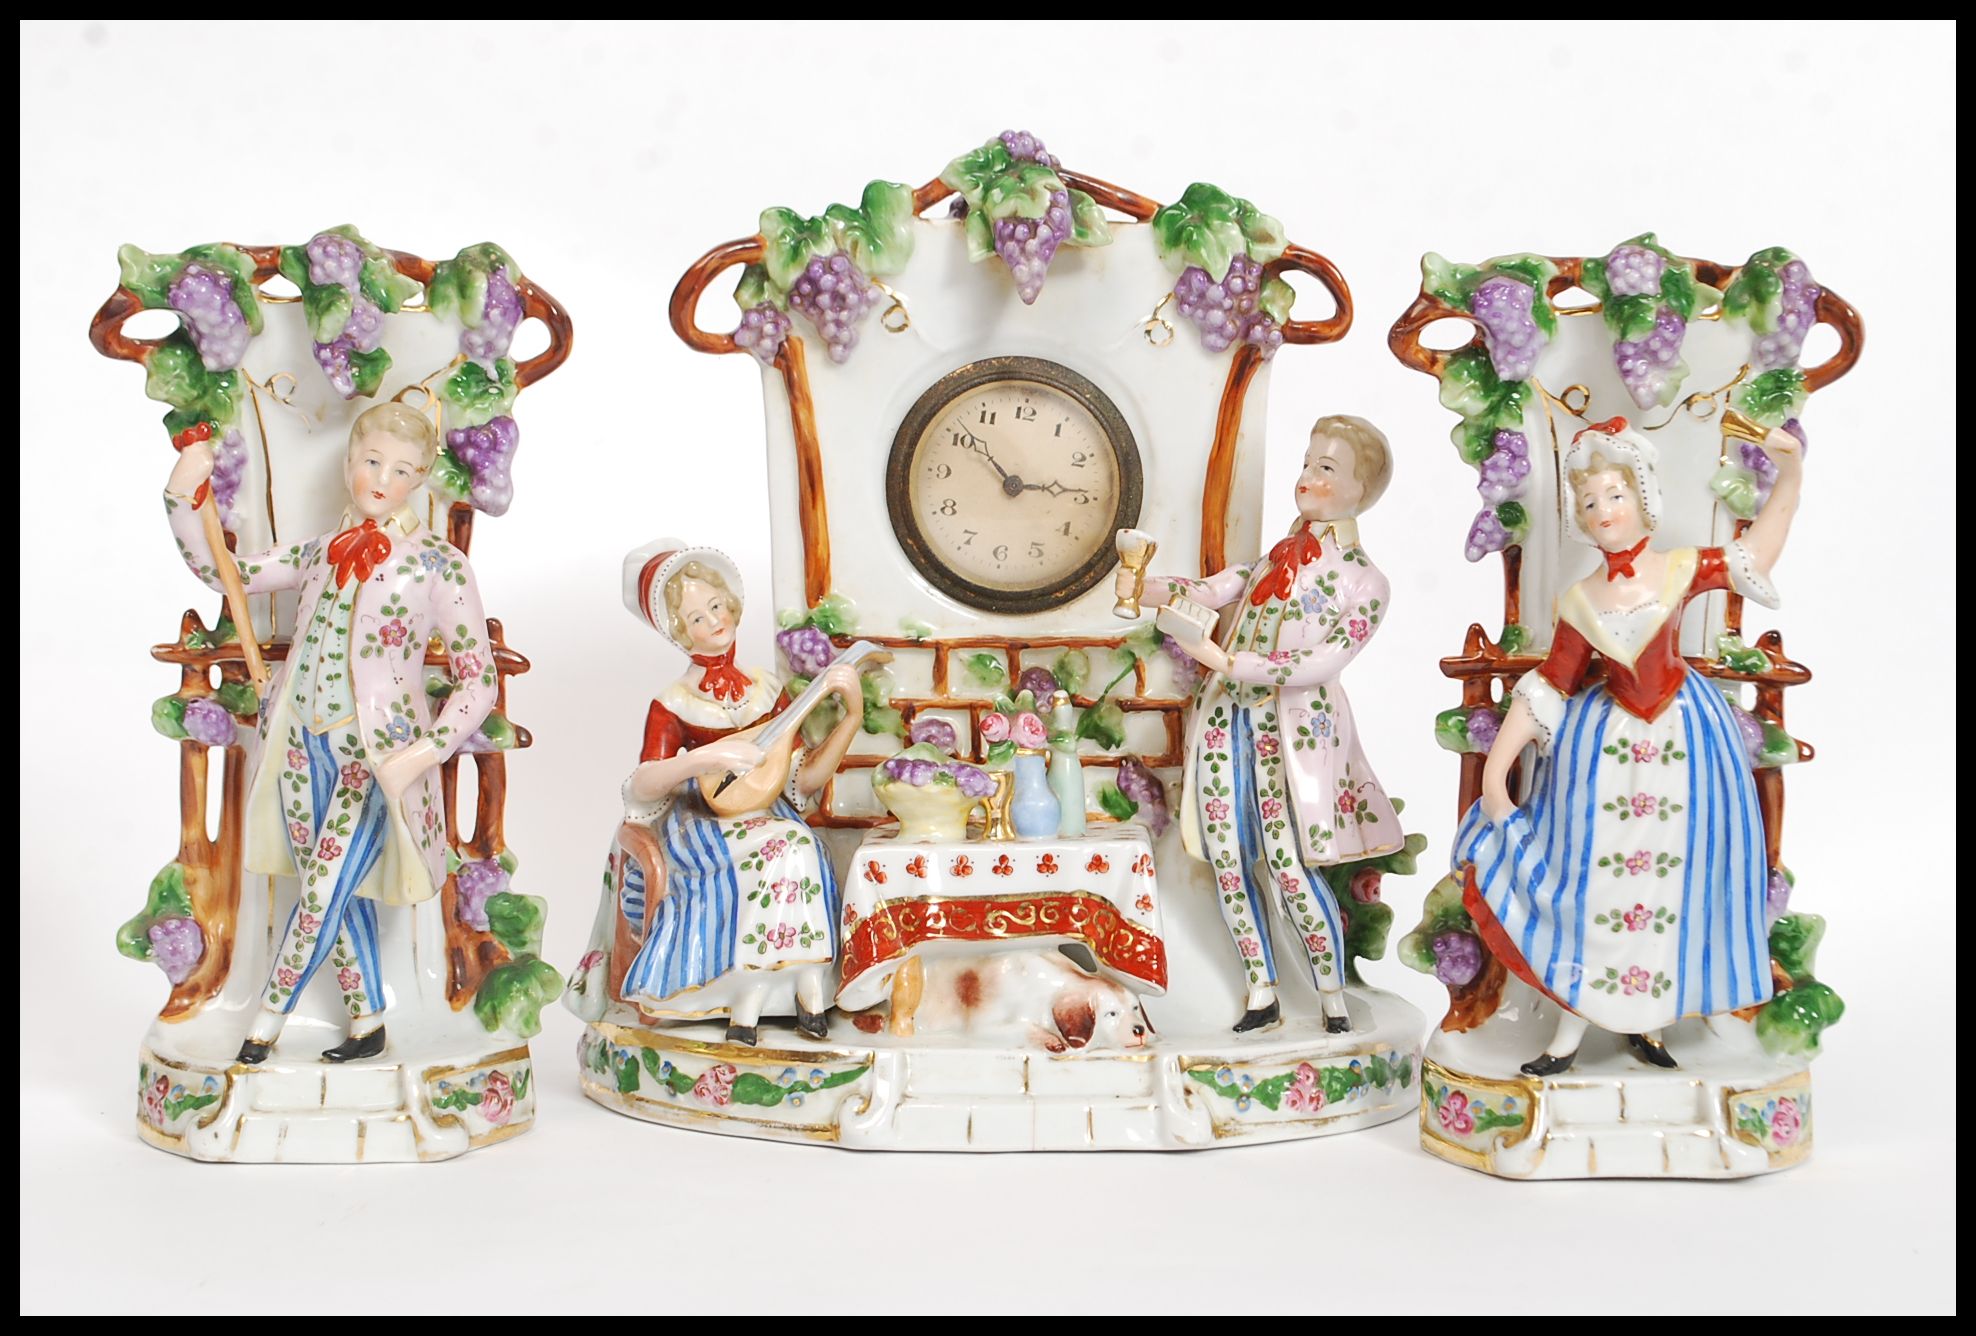 A 20th century Dresden style continental ceramic clock and garniture set.